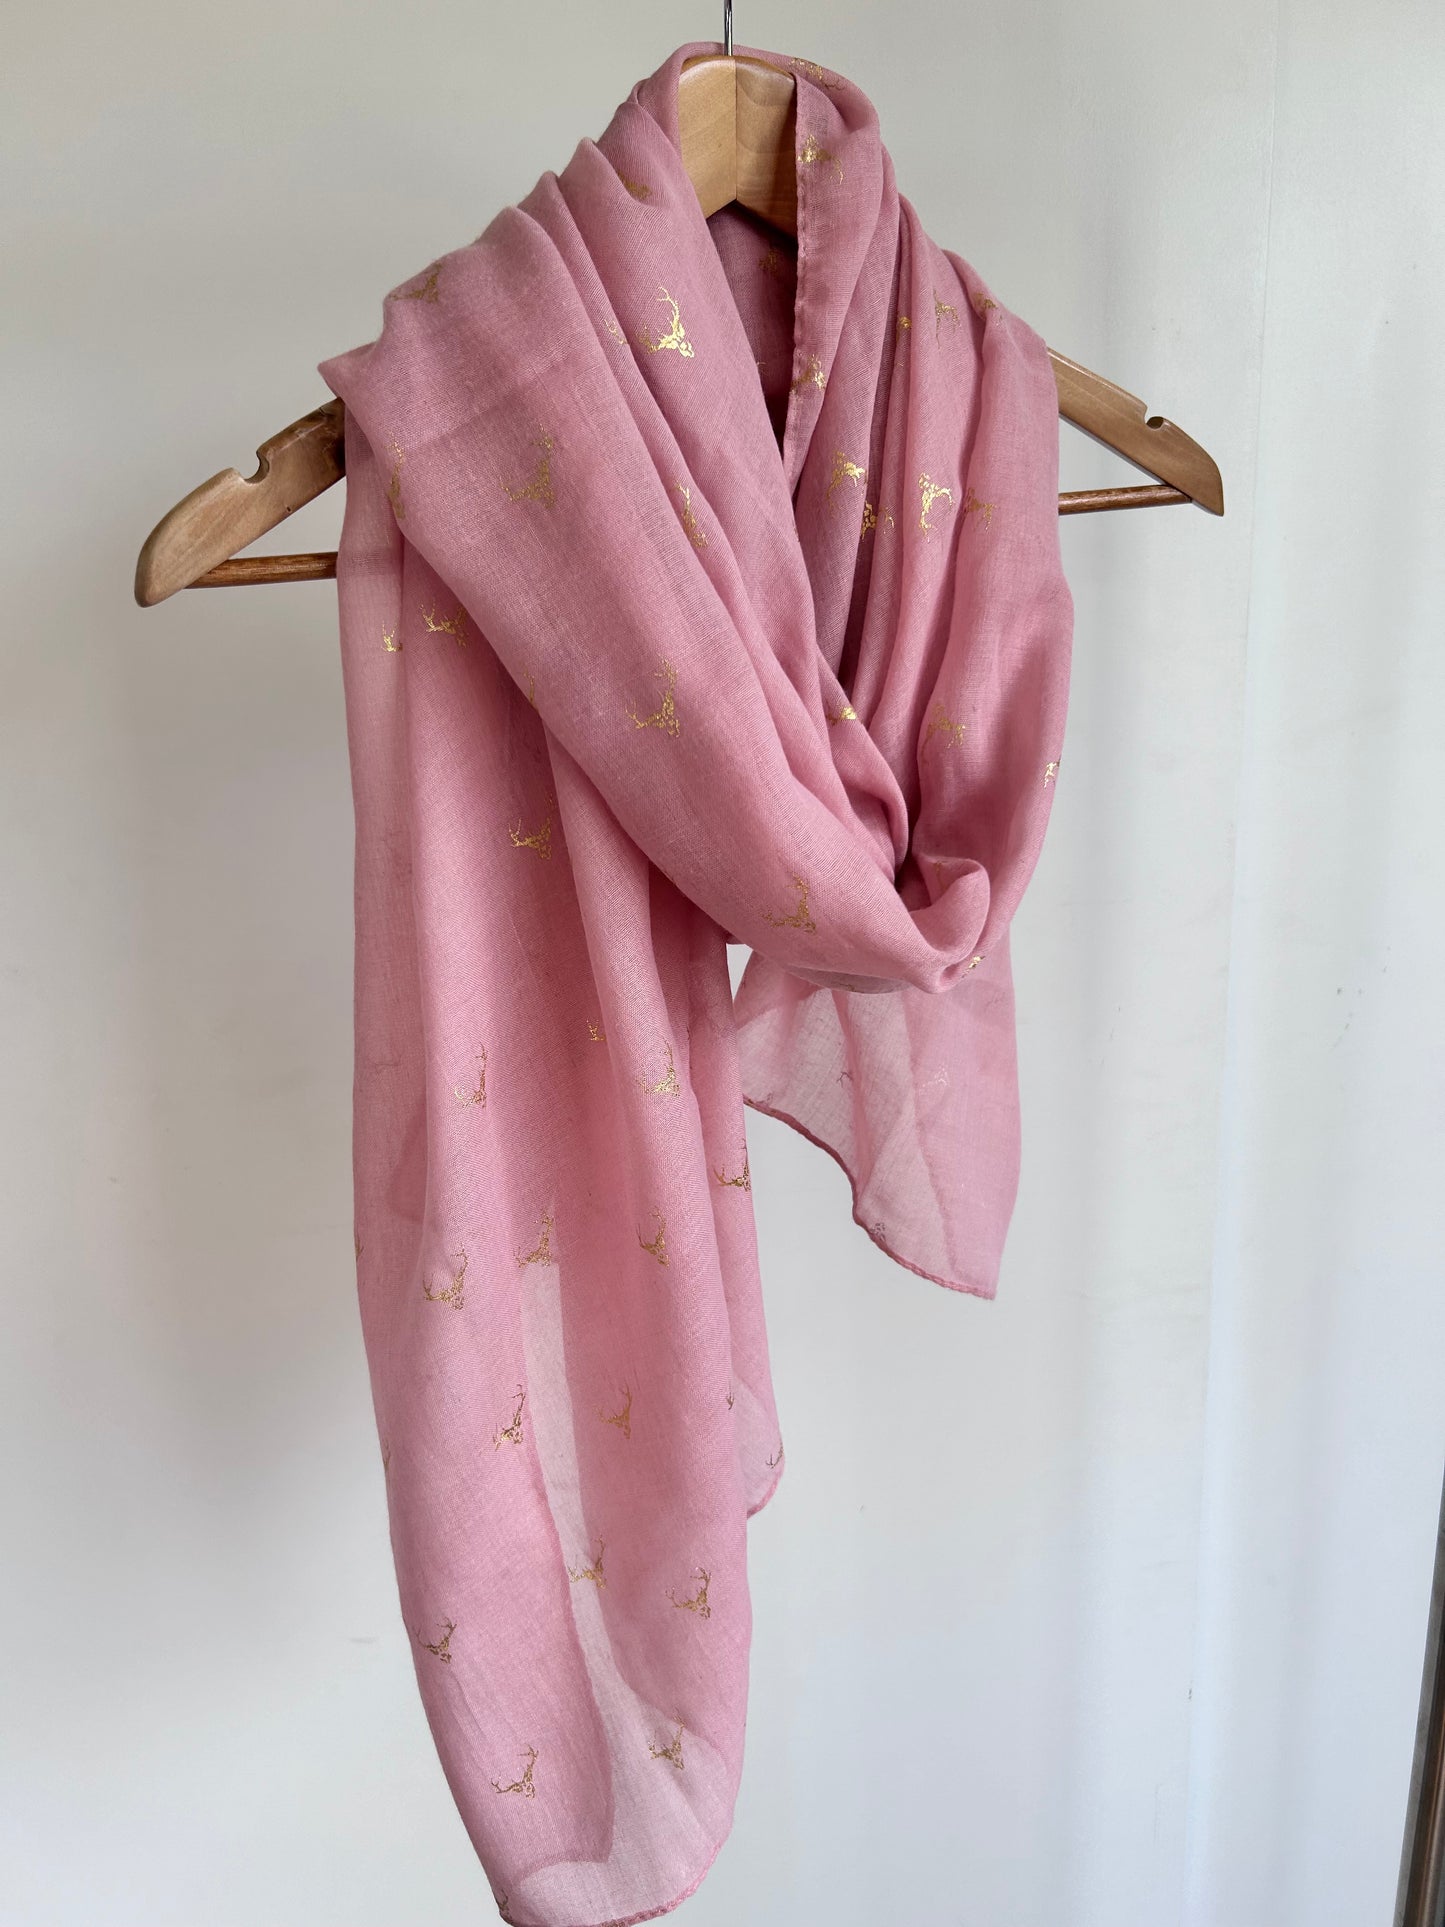 Stag scarf - pink/gold